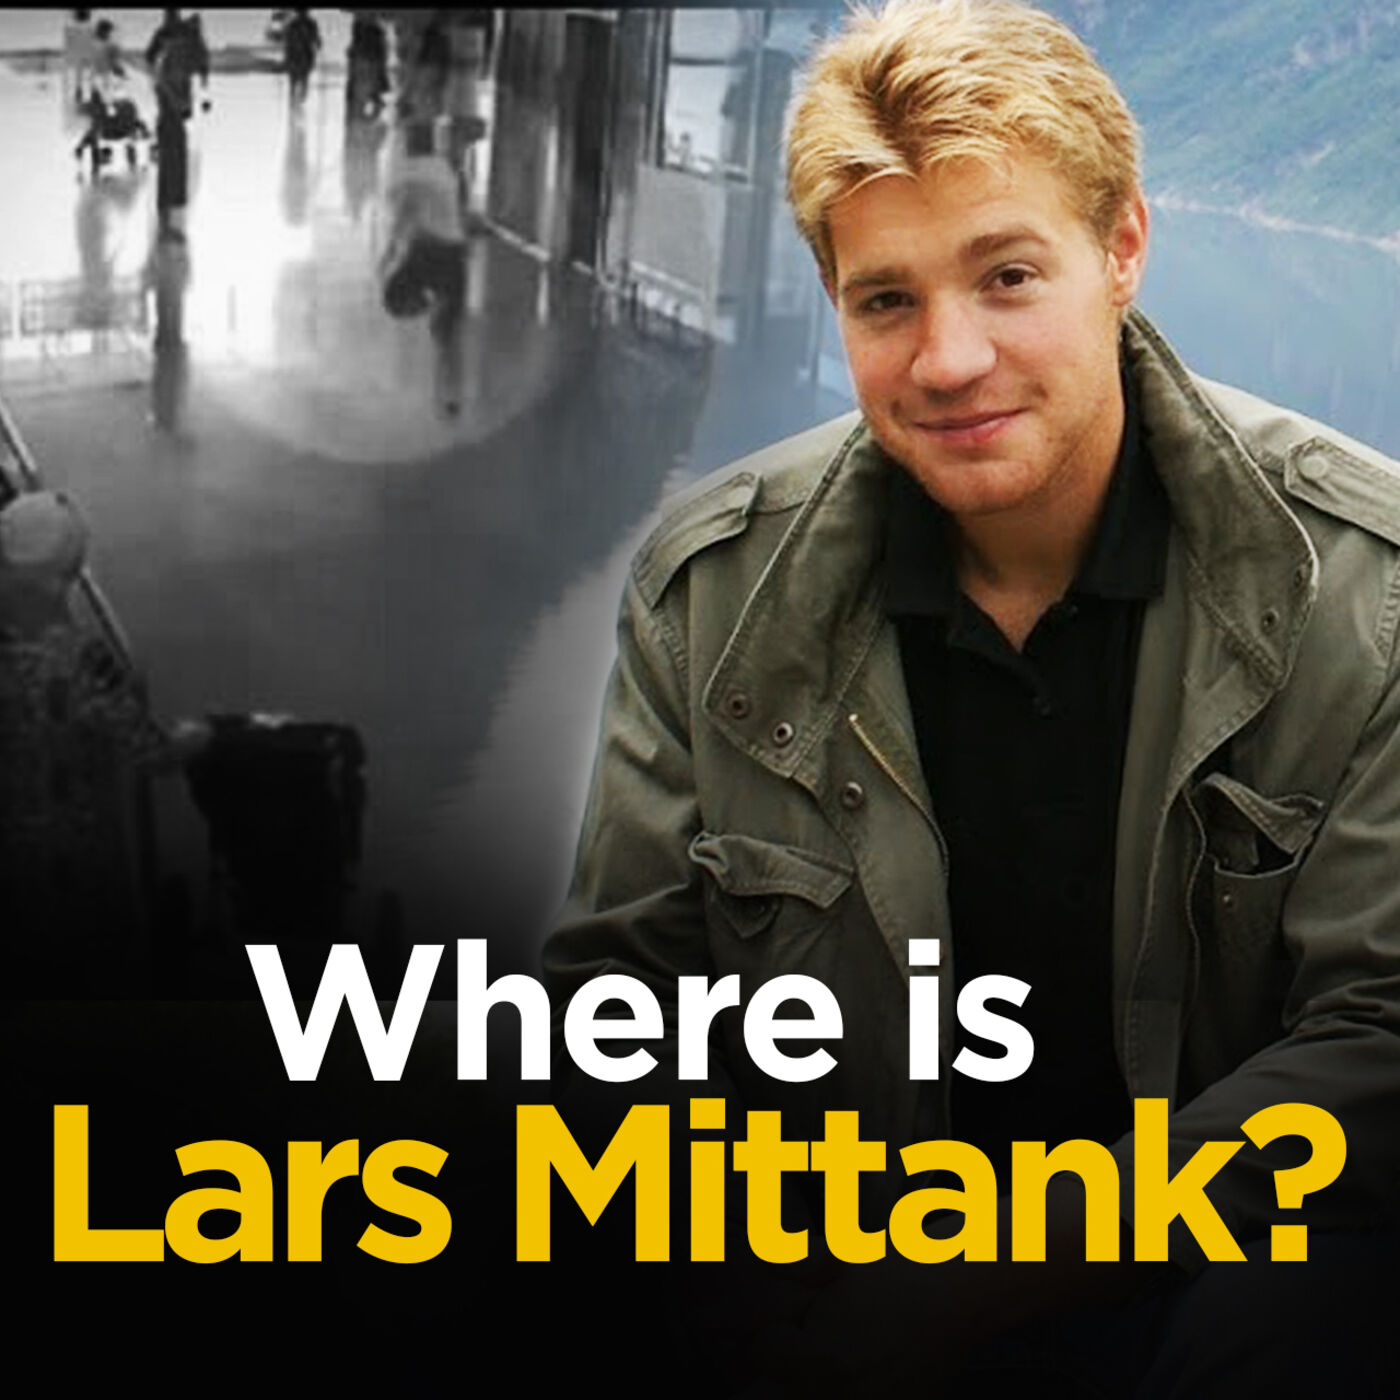 The Bizarre Disappearance of Lars Mittank